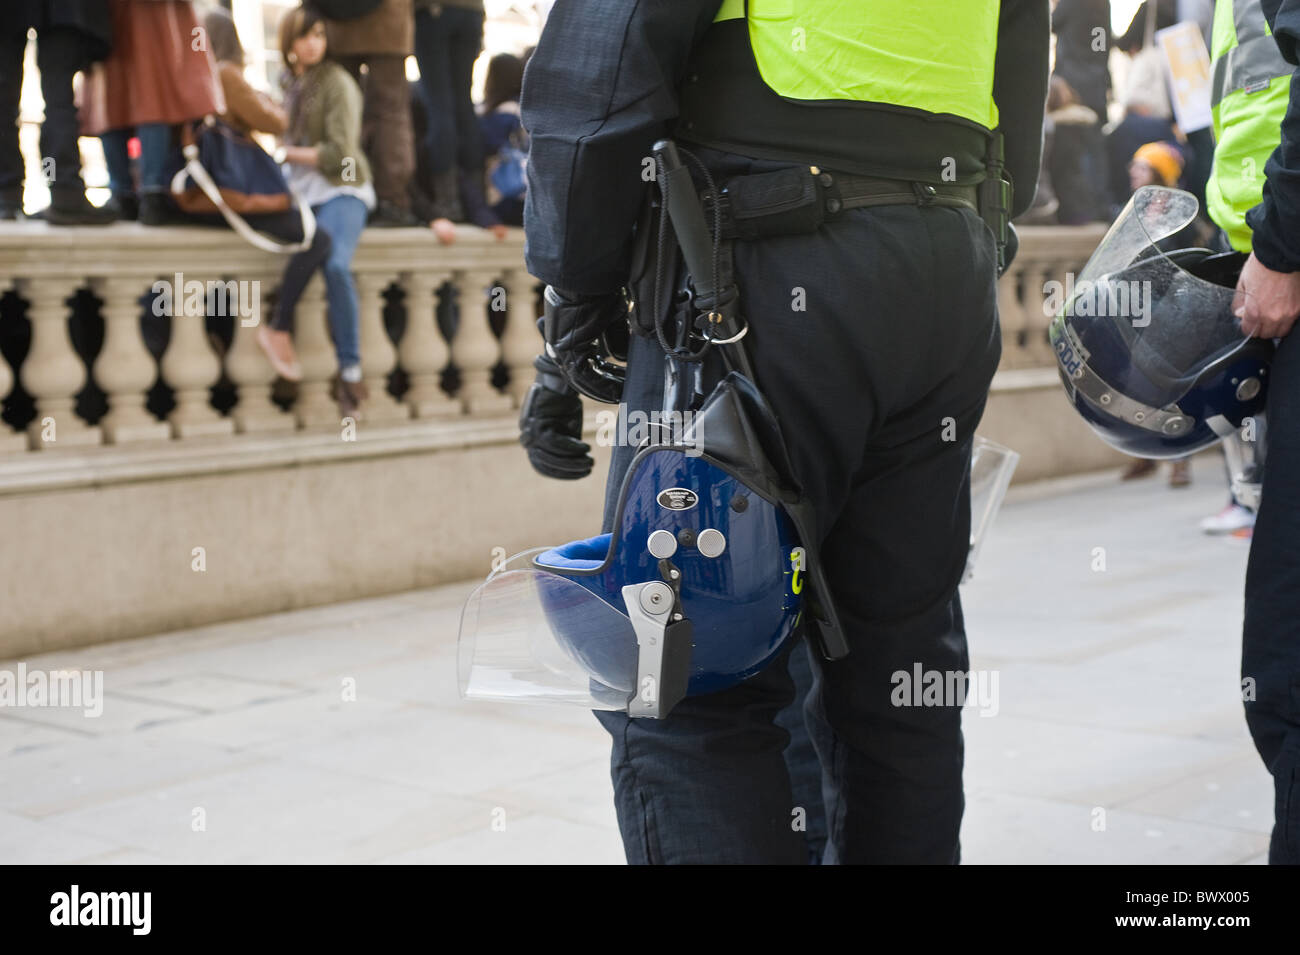 Metropolitan police officers prepared for trouble at a demonstration in London. Stock Photo